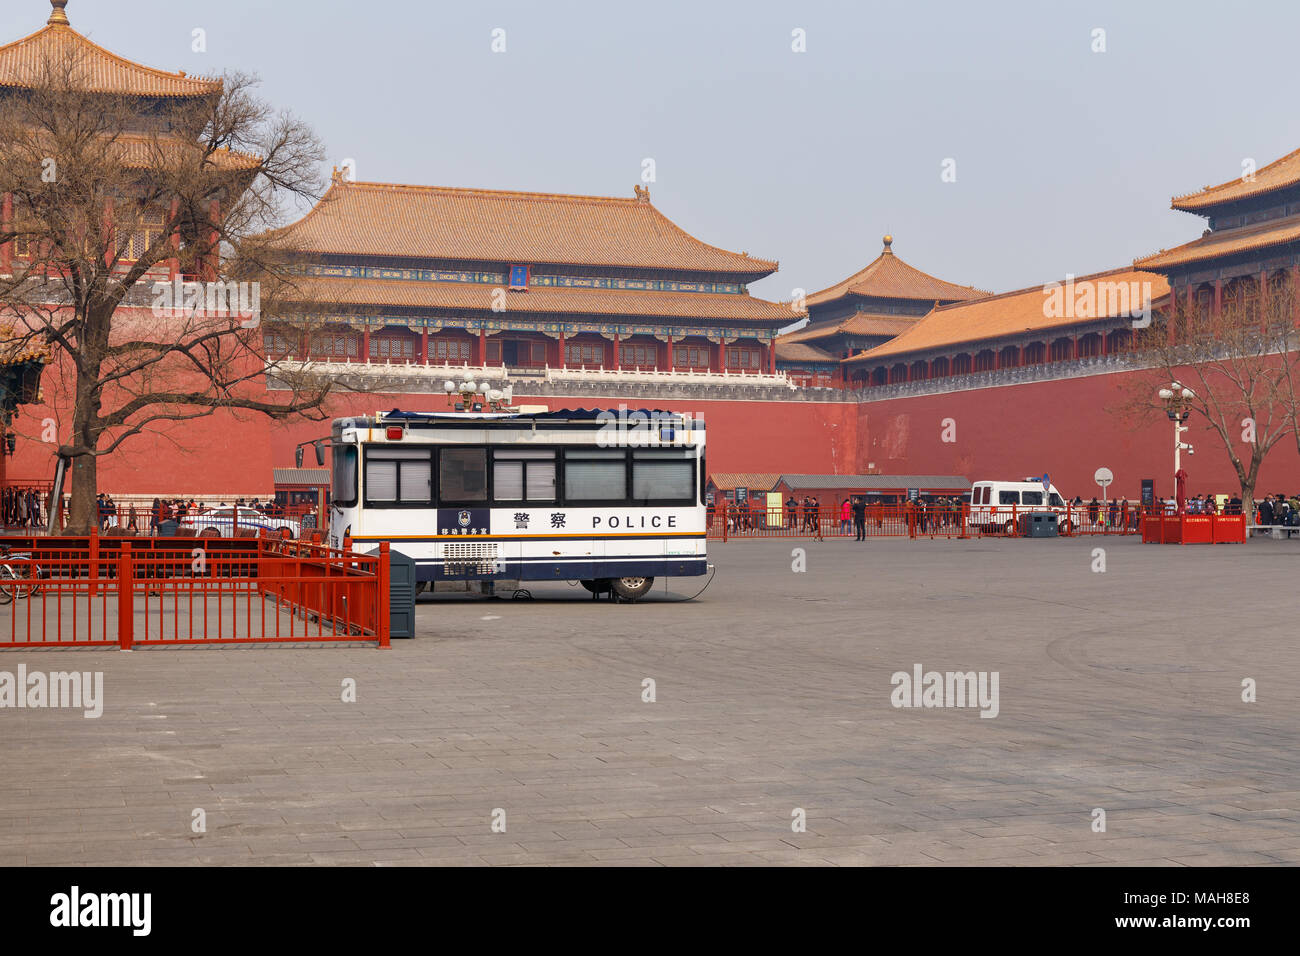 Mobile police station parked at the entrance to the Forbidden City in Beijing, China in March 2018. Stock Photo